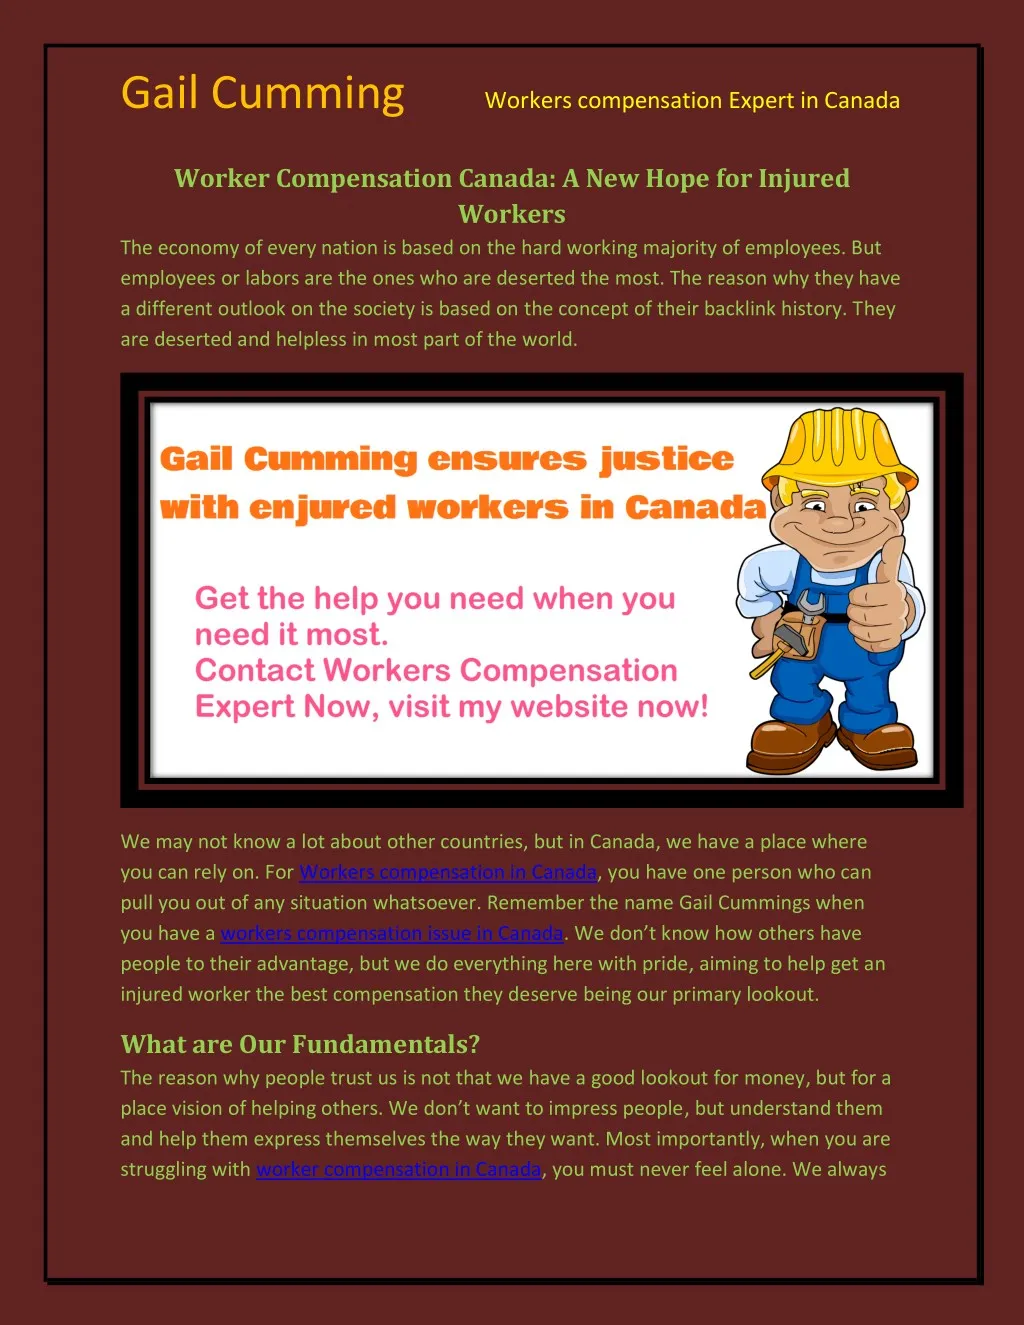 gail cumming workers compensation expert in canada